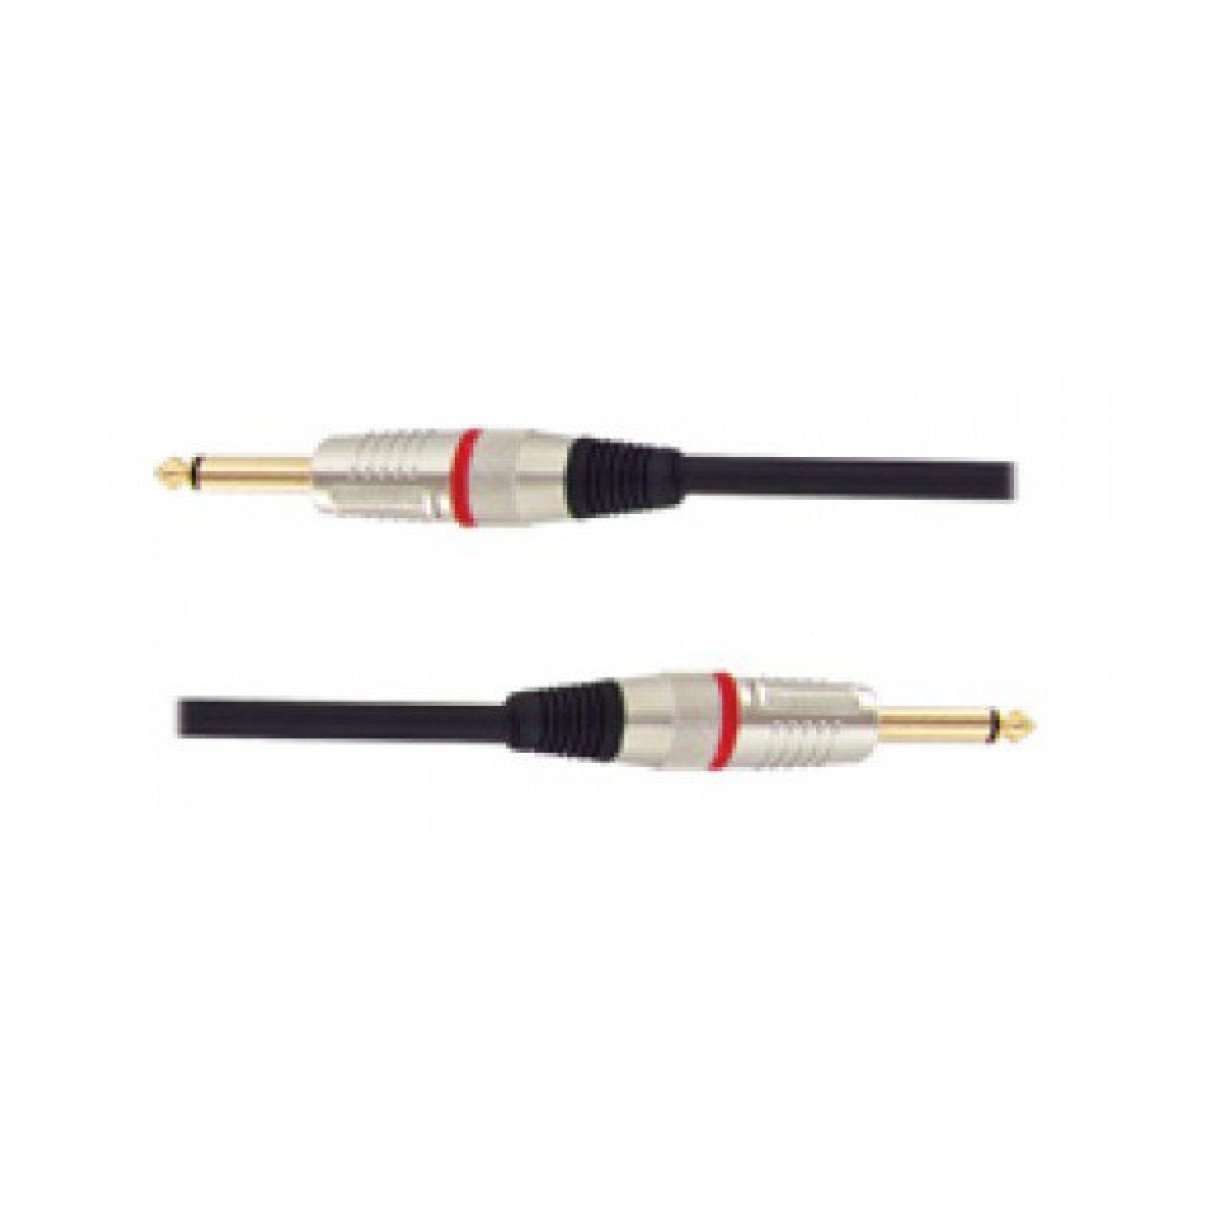 Carson Rocklines RSH20 20 foot 1/4 inch Speaker Cable